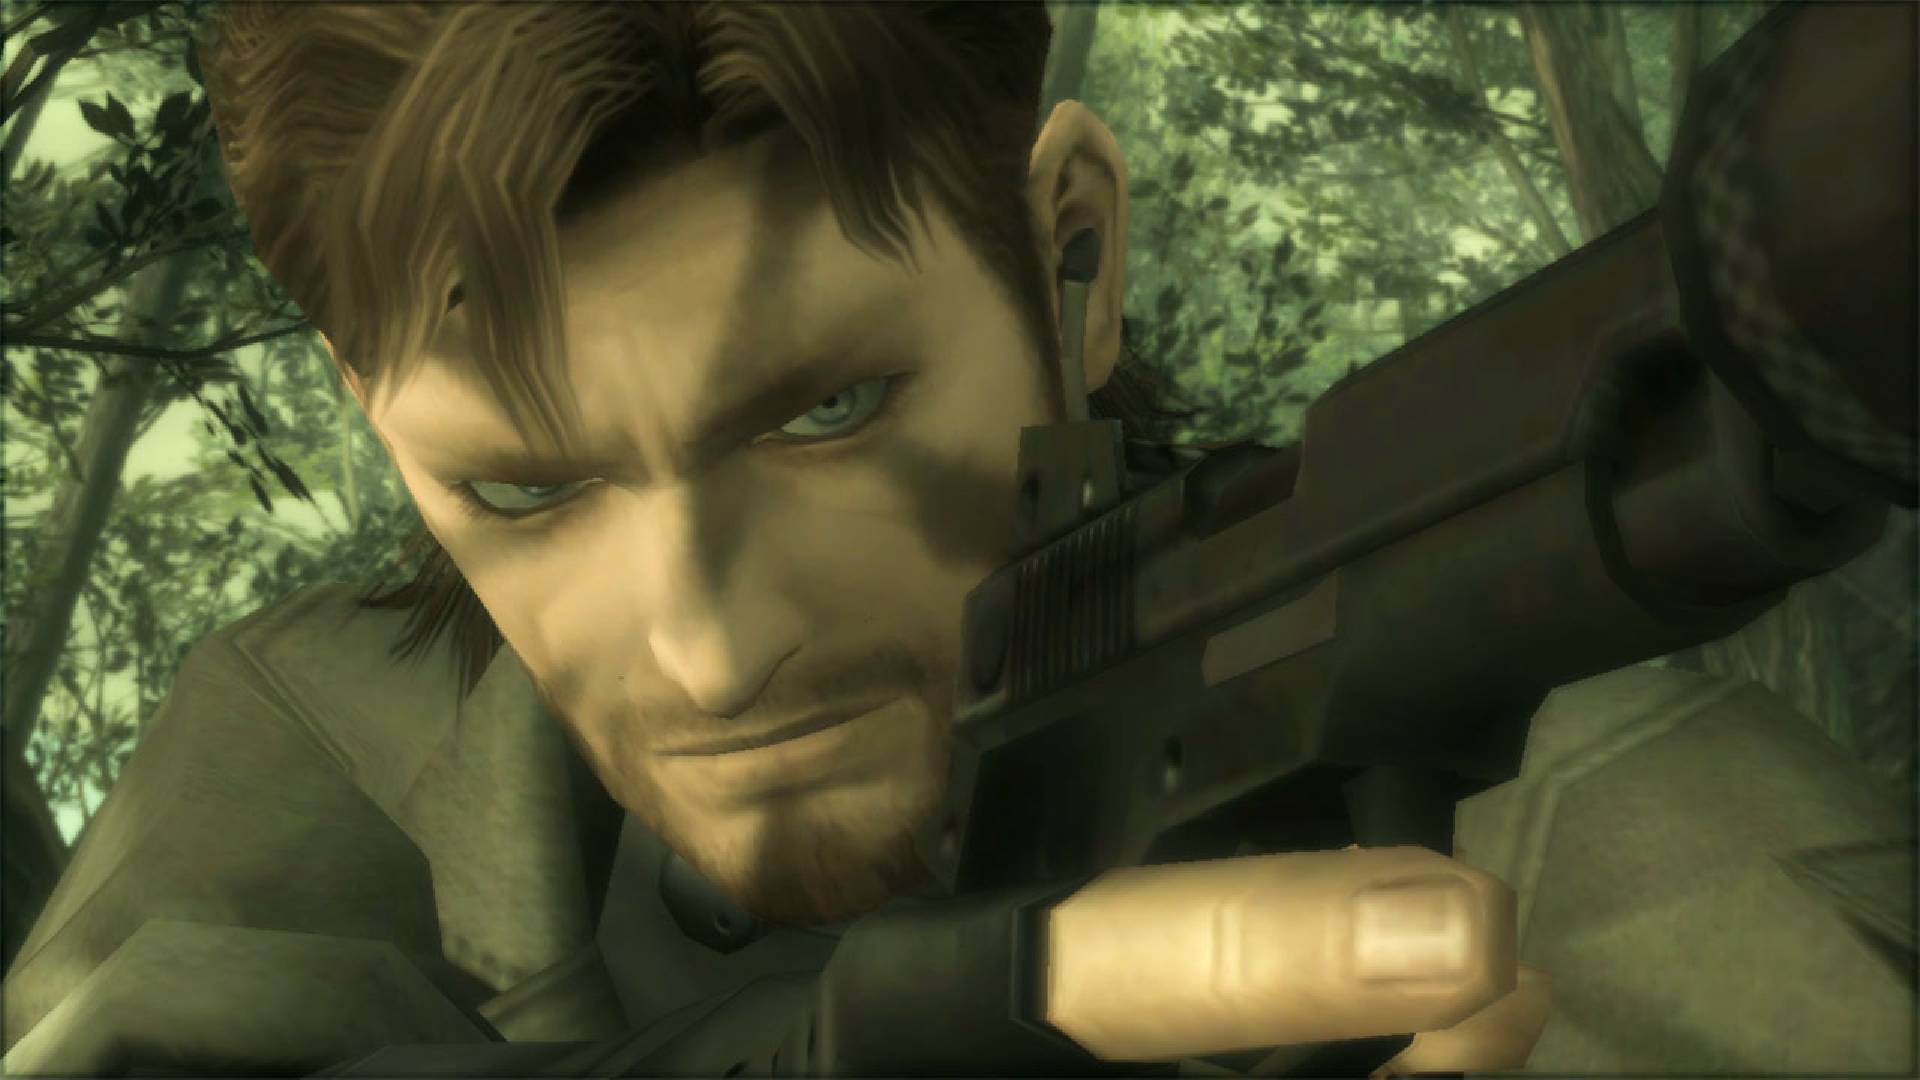 Metal Gear Solid 3' players discover a clever feature on the 3DS version